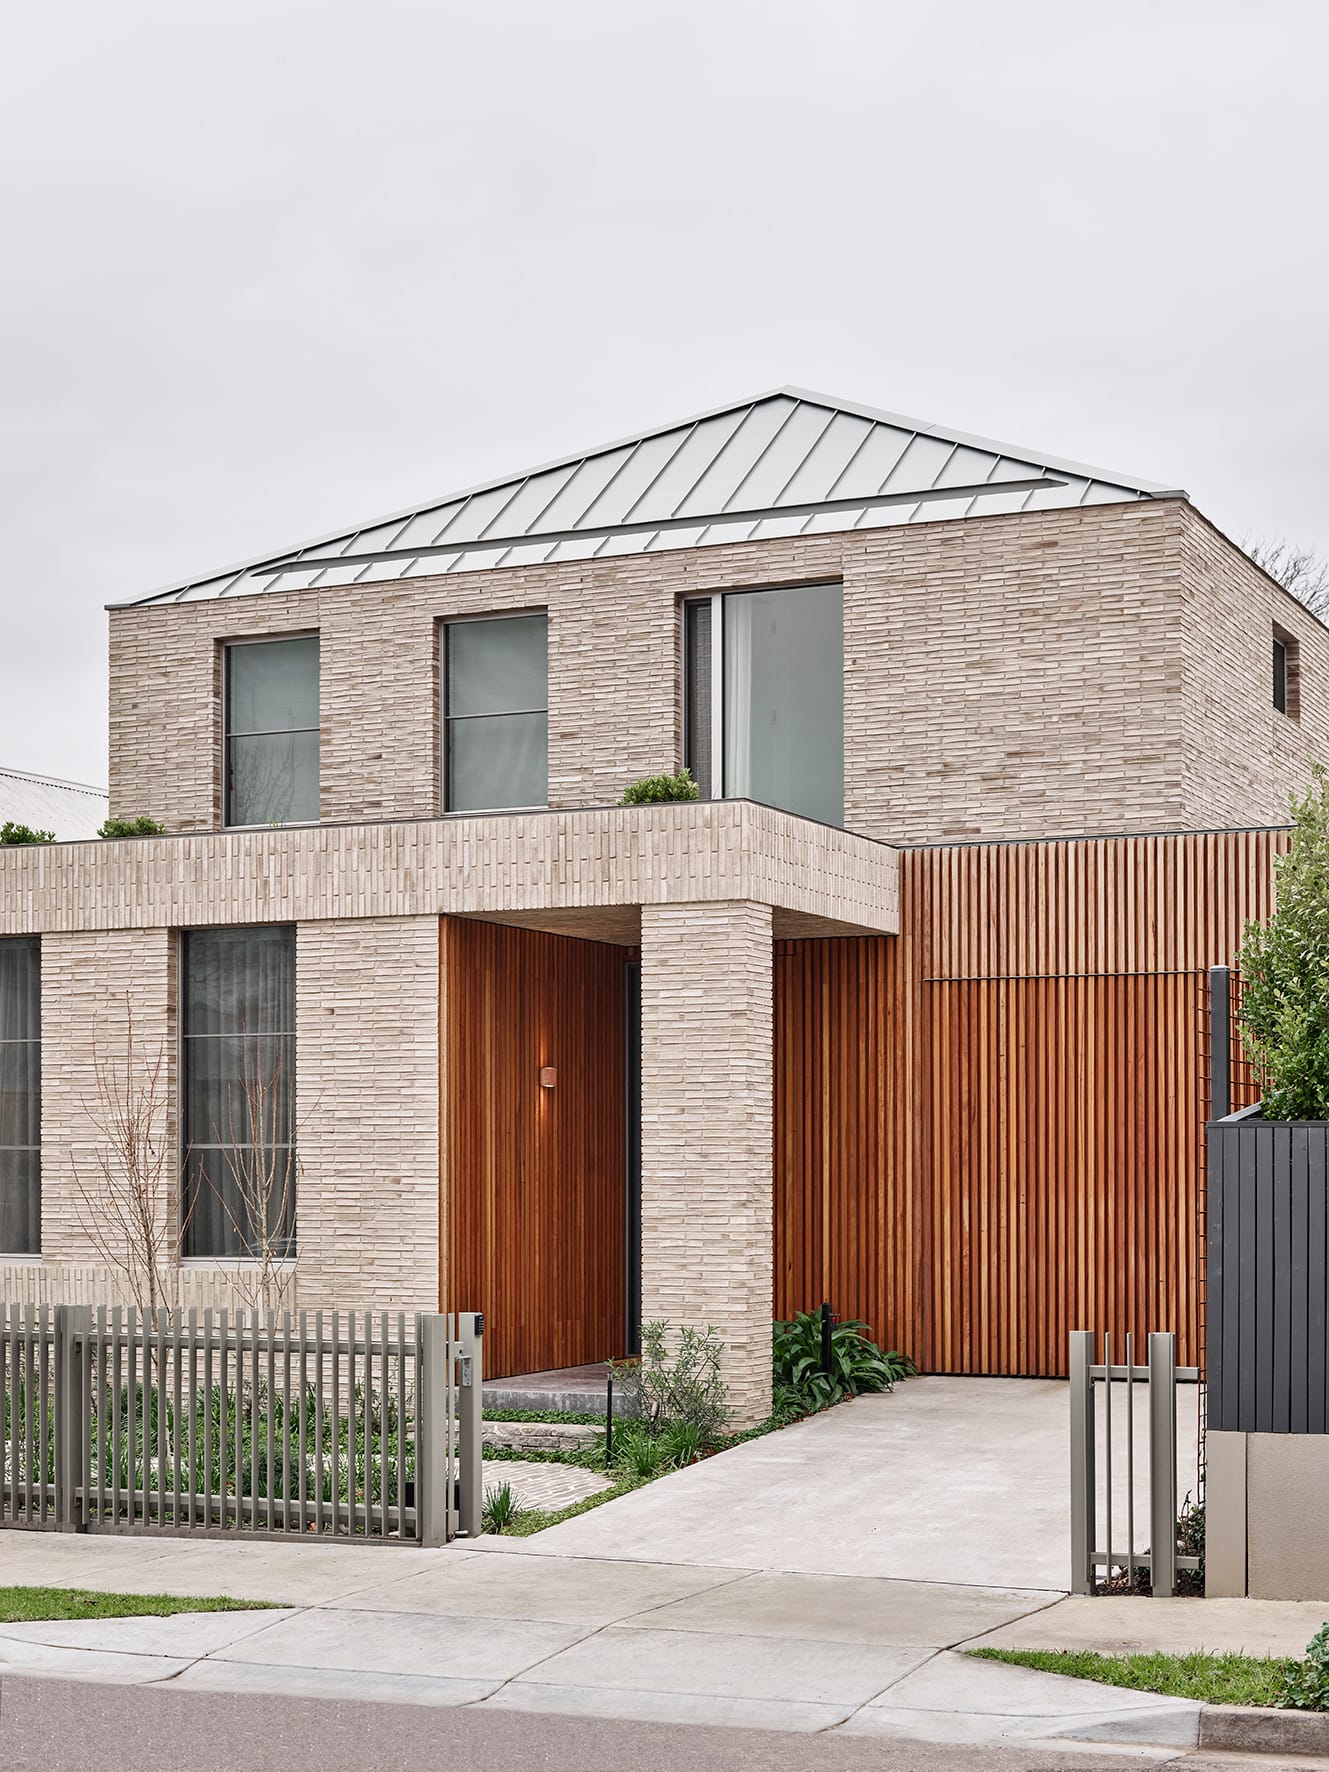 Terra Firma by RobsonRak showing the street facade with brickwork and timber cladding